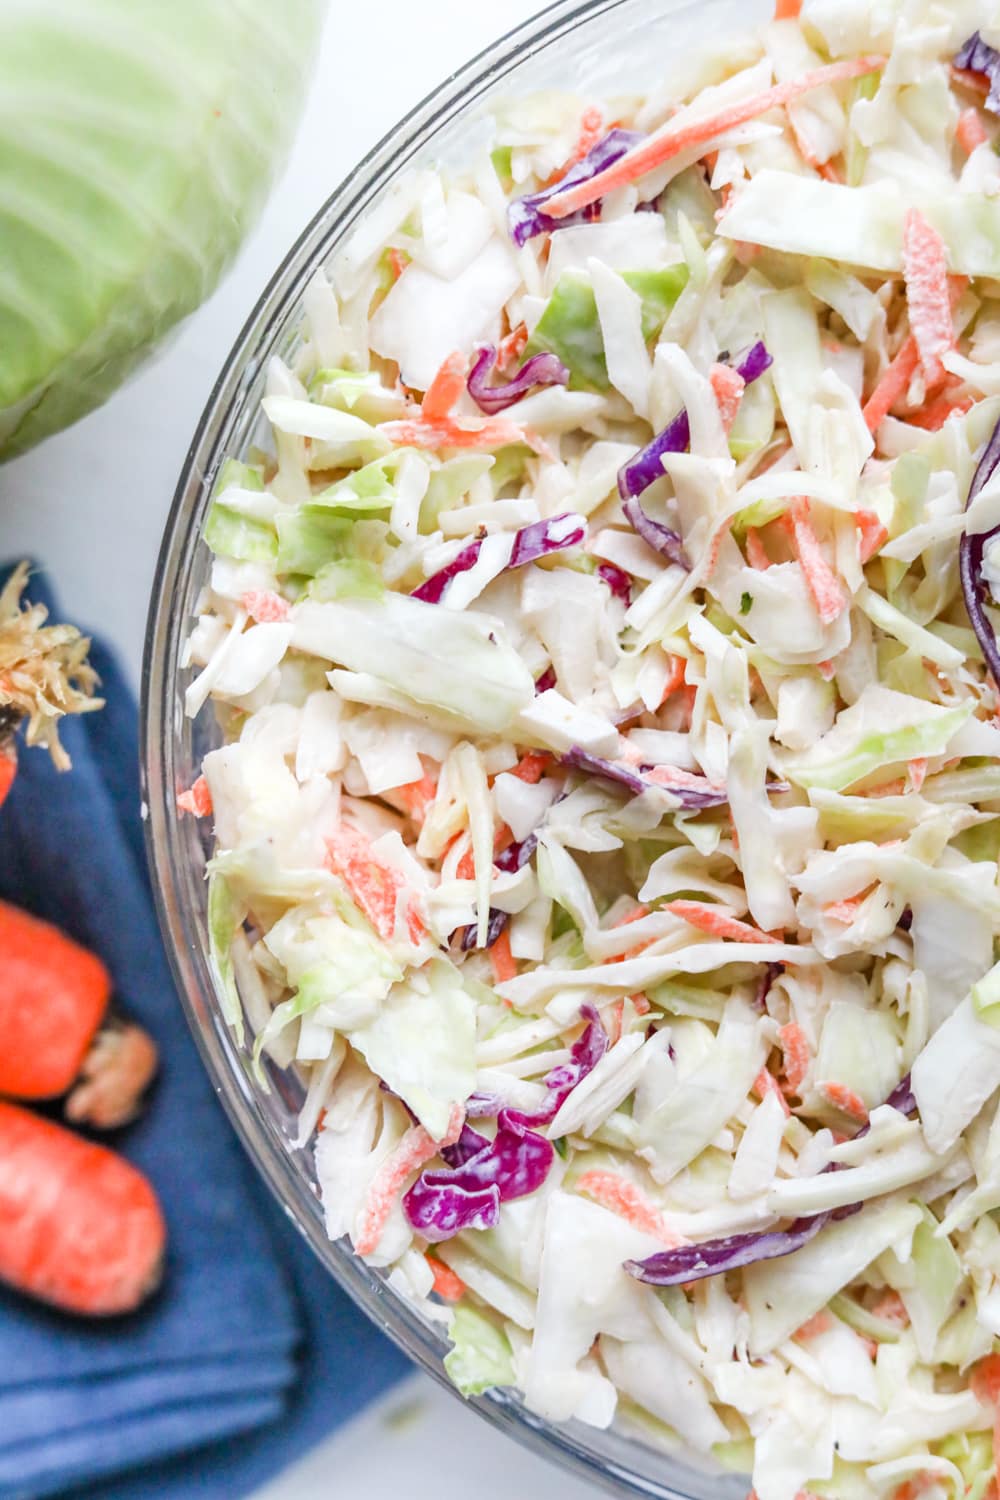 Low carb coleslaw in a bowl next to carrots and green cabbage.